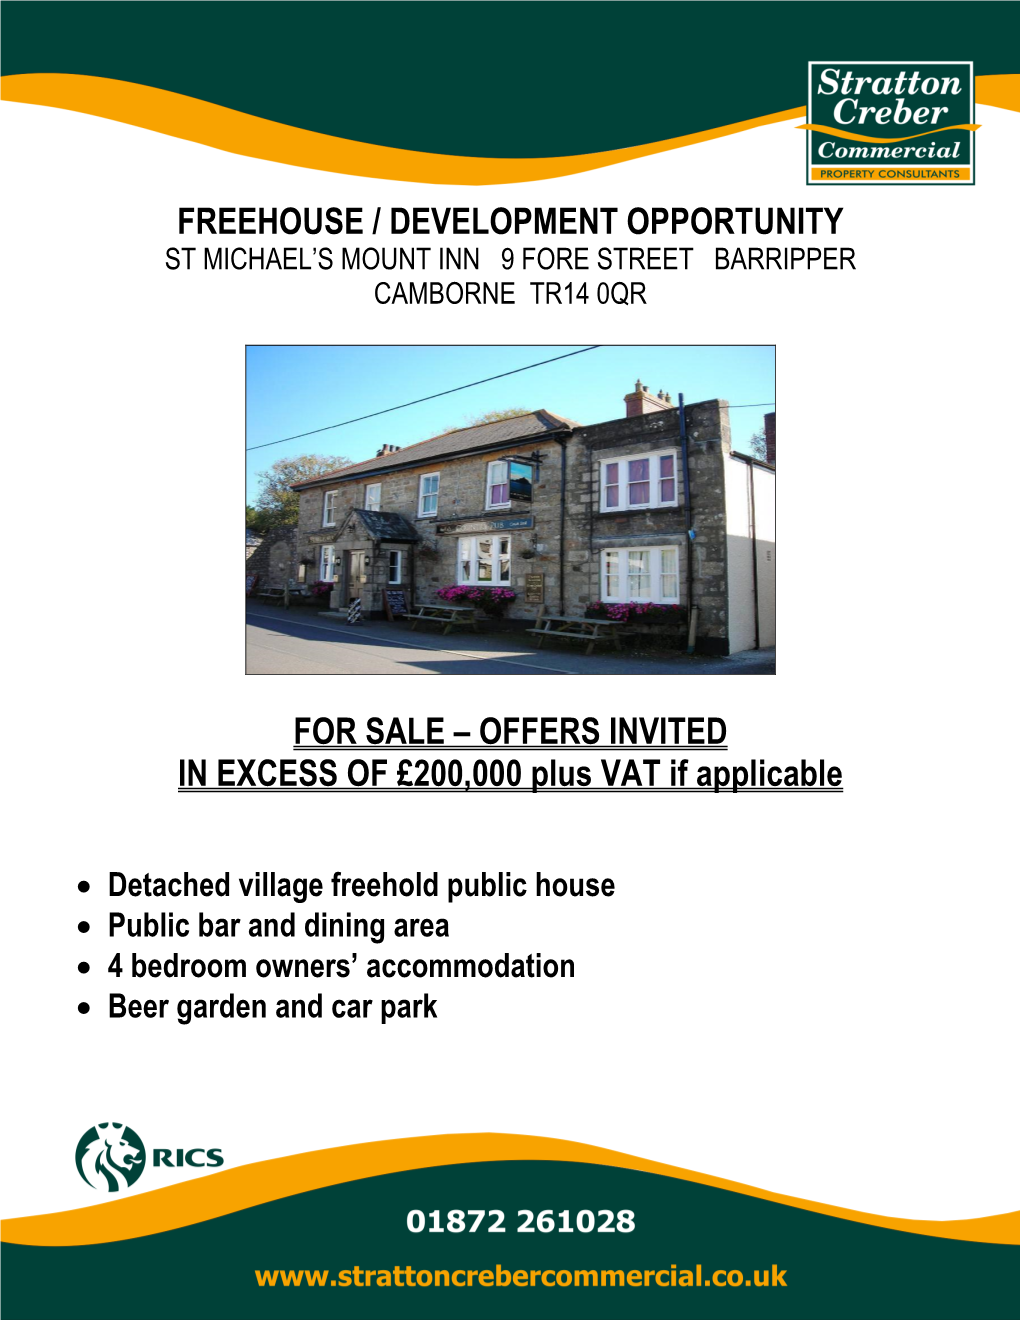 Freehouse / Development Opportunity for Sale